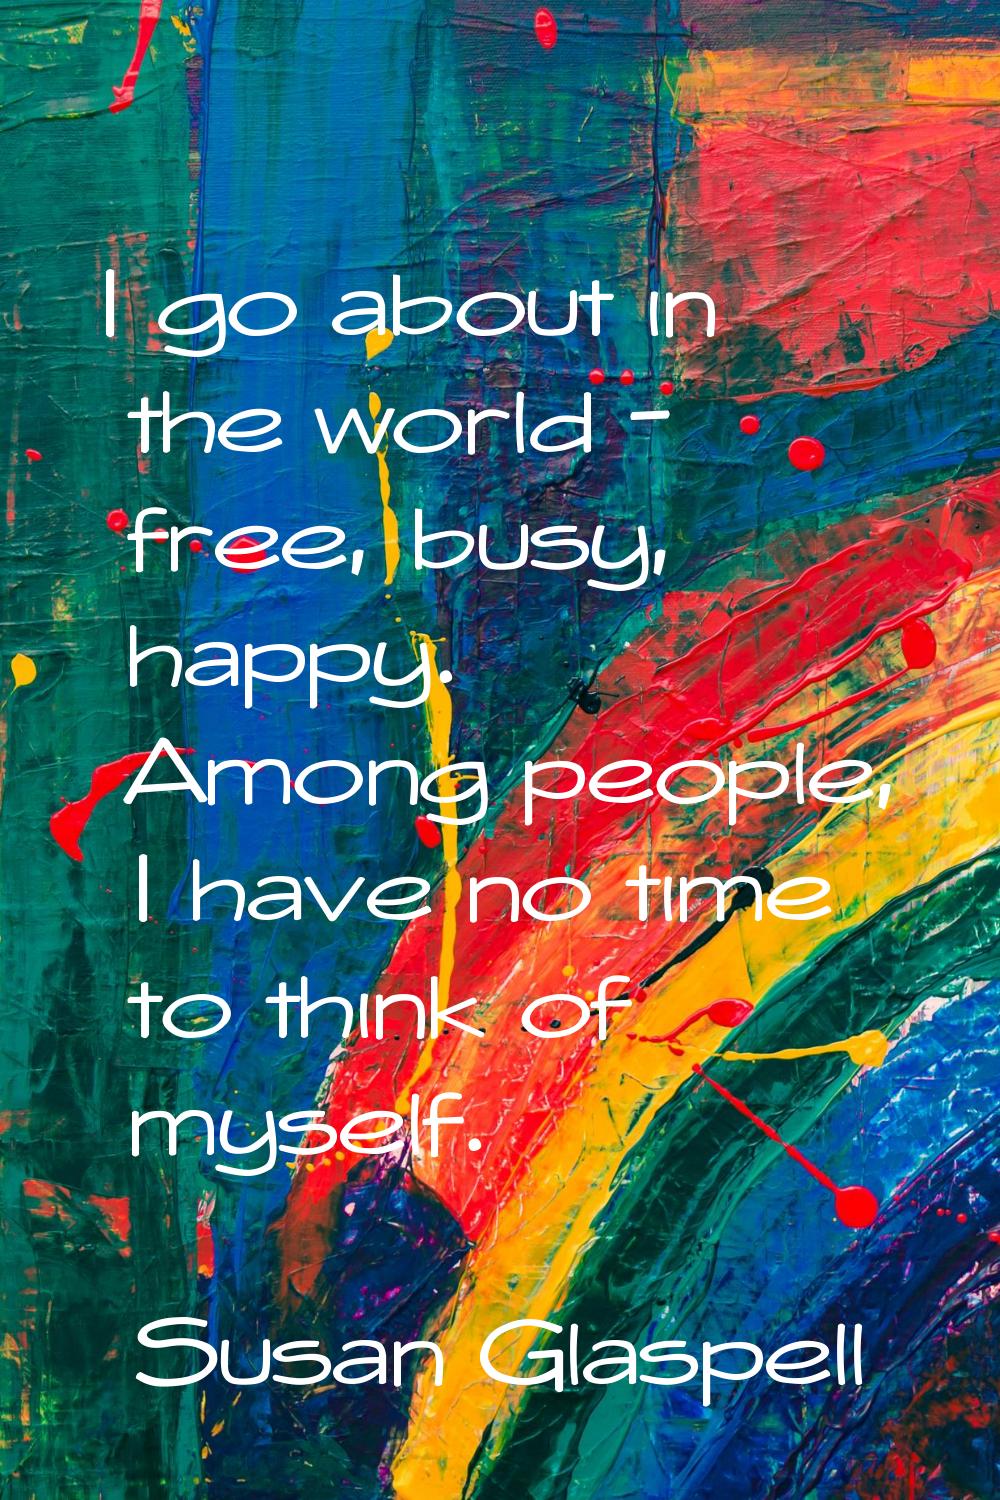 I go about in the world - free, busy, happy. Among people, I have no time to think of myself.